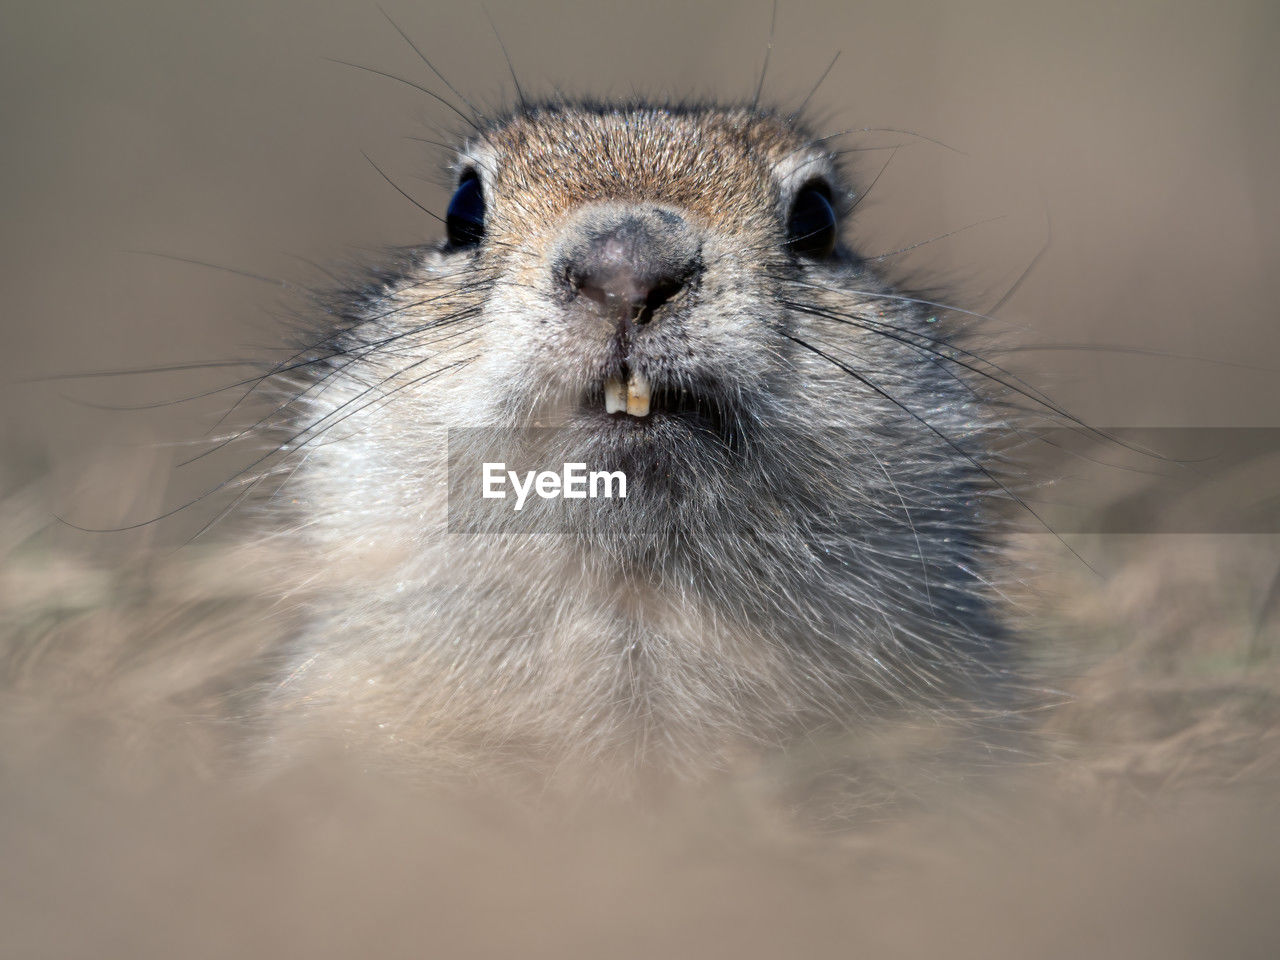 animal, animal themes, whiskers, one animal, animal wildlife, mammal, close-up, wildlife, portrait, no people, looking at camera, rodent, animal body part, squirrel, animal hair, animal head, nature, cute, outdoors, prairie dog, macro photography, front view